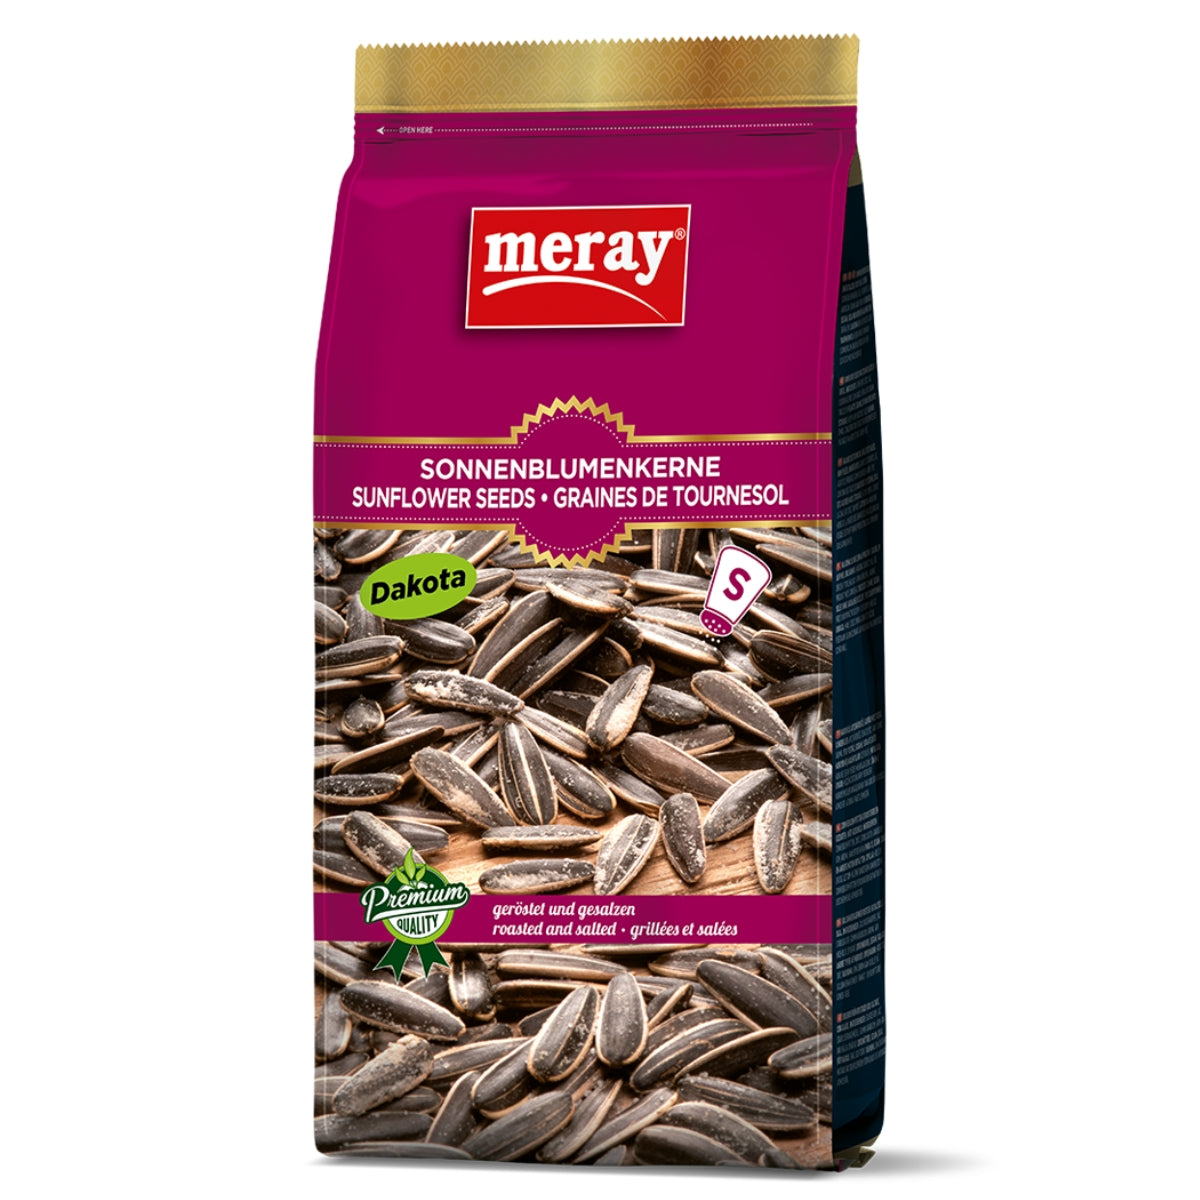 A bag of Meray - Roasted & Salted Dakota Sunflower Seeds labeled "dakota" in multiple languages, emphasizing their premium, roasted, and salted quality.